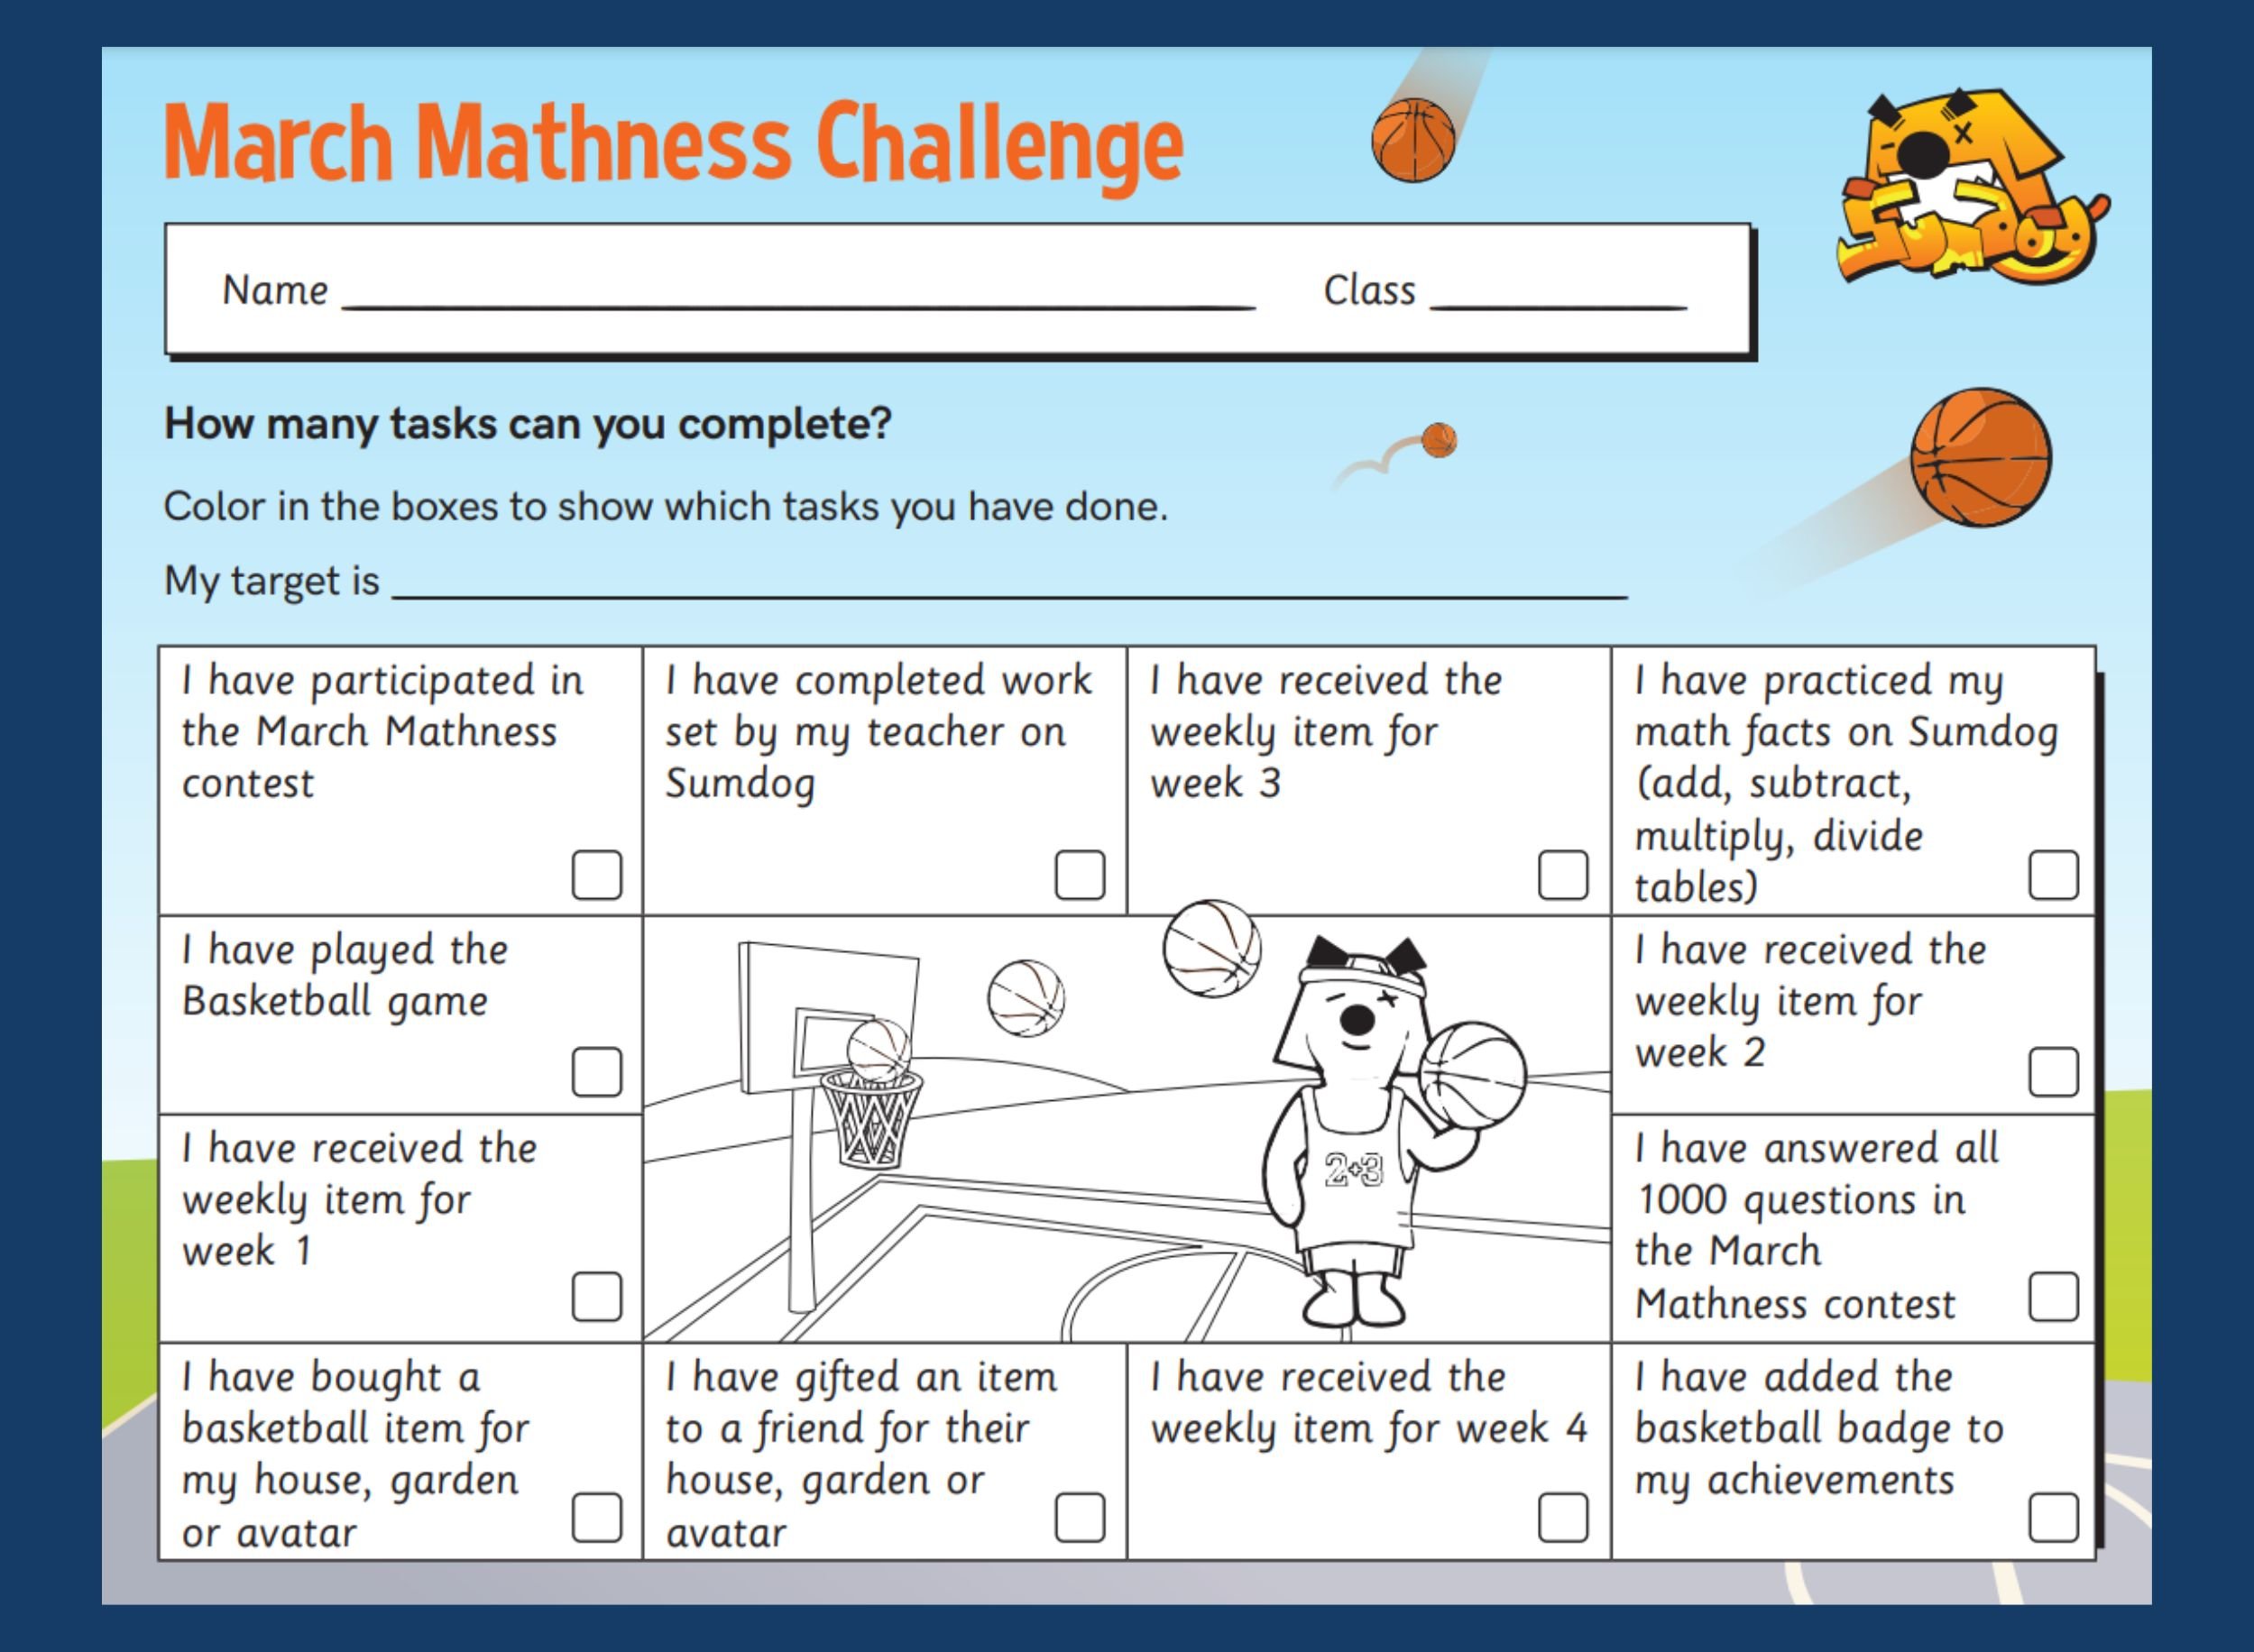 Sumdog March Mathness color grid